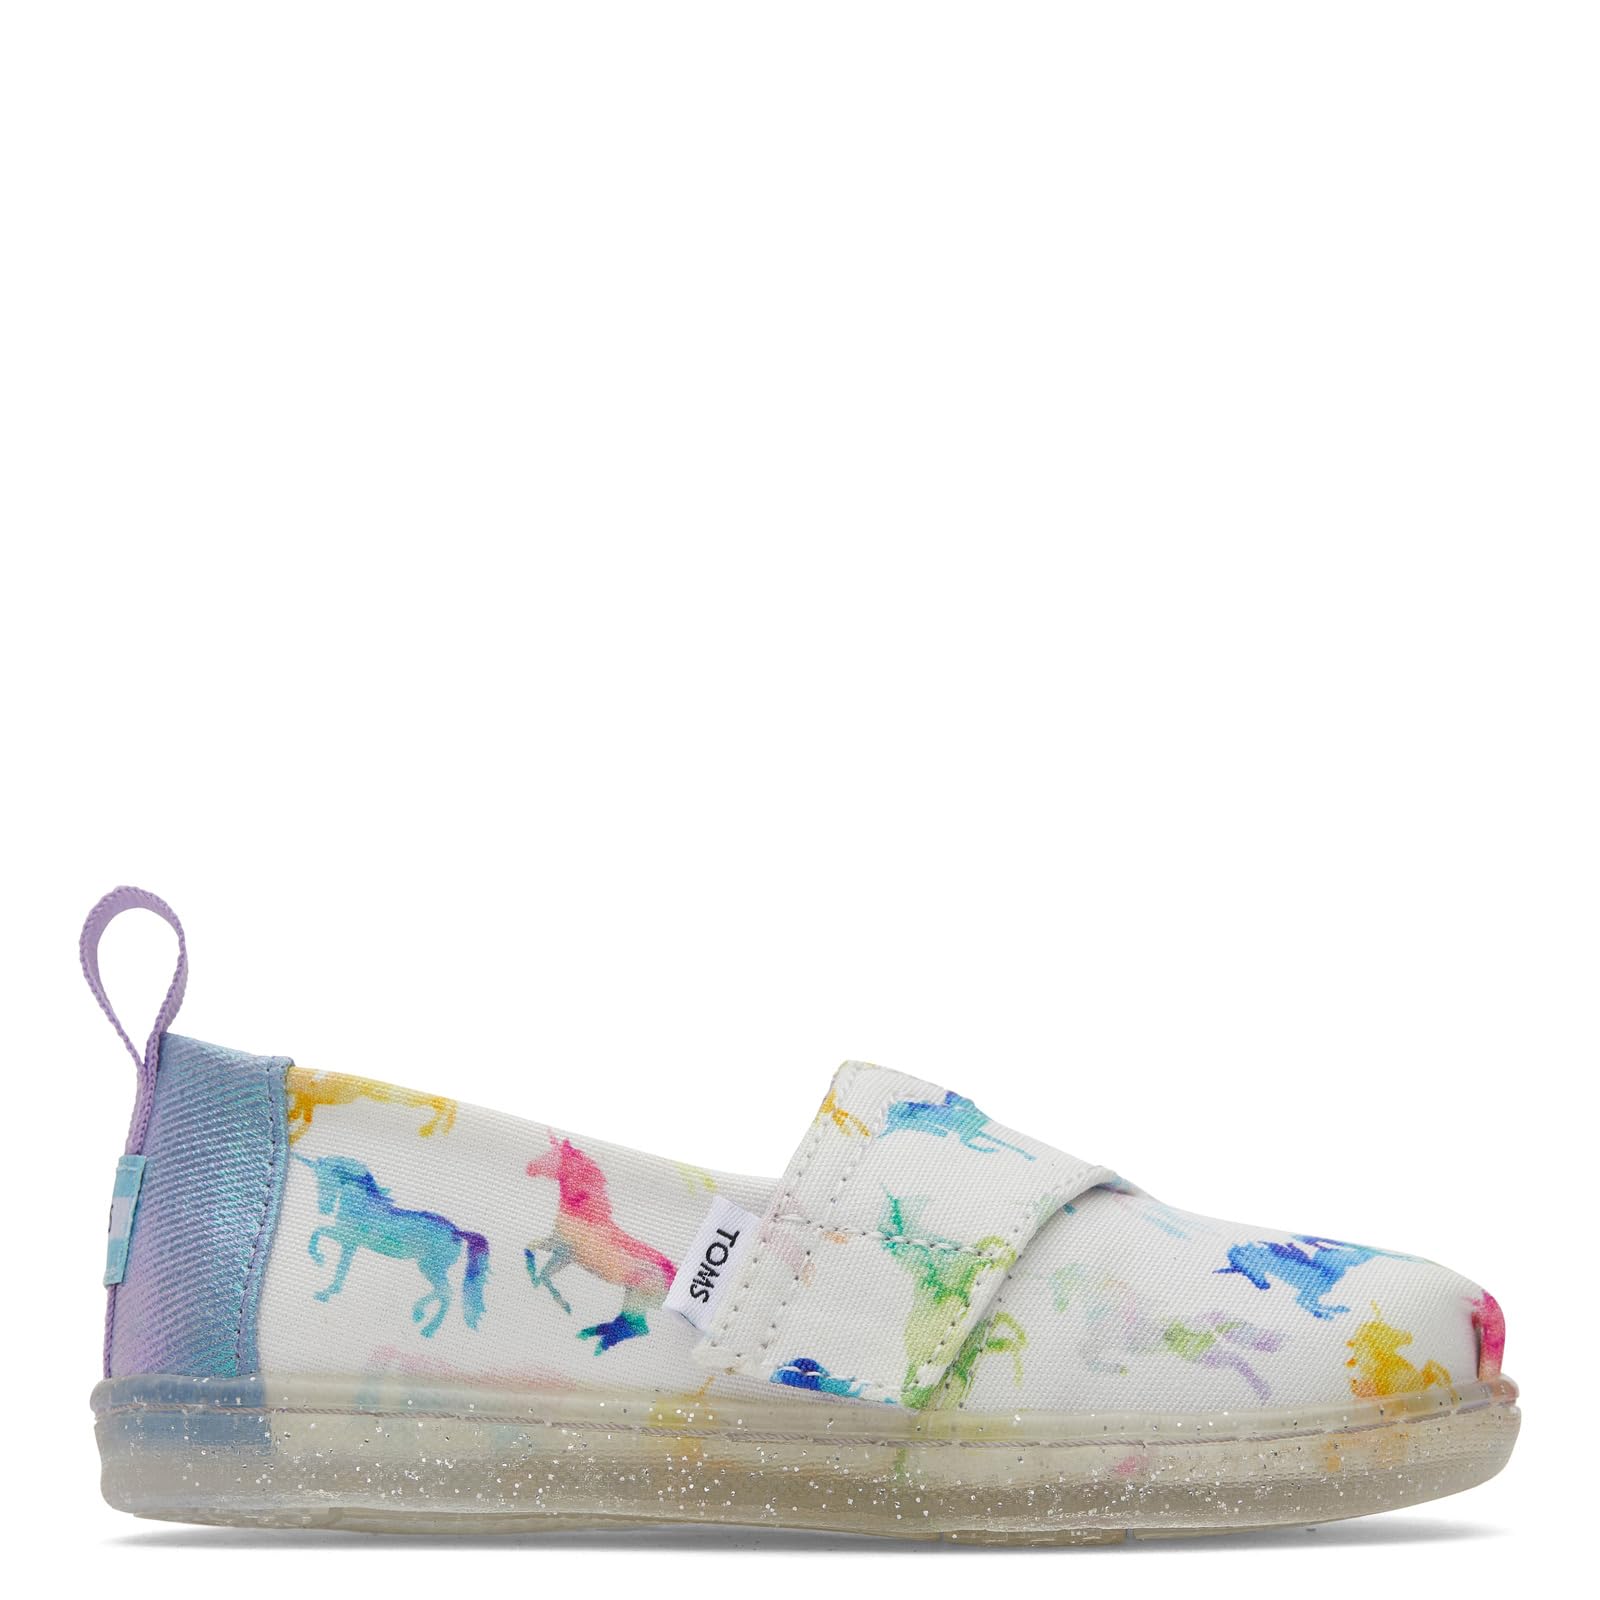 TOMS Girls Alpargata Loafer Flat, White Watercolor Ombre Unicorns, 4 Toddler